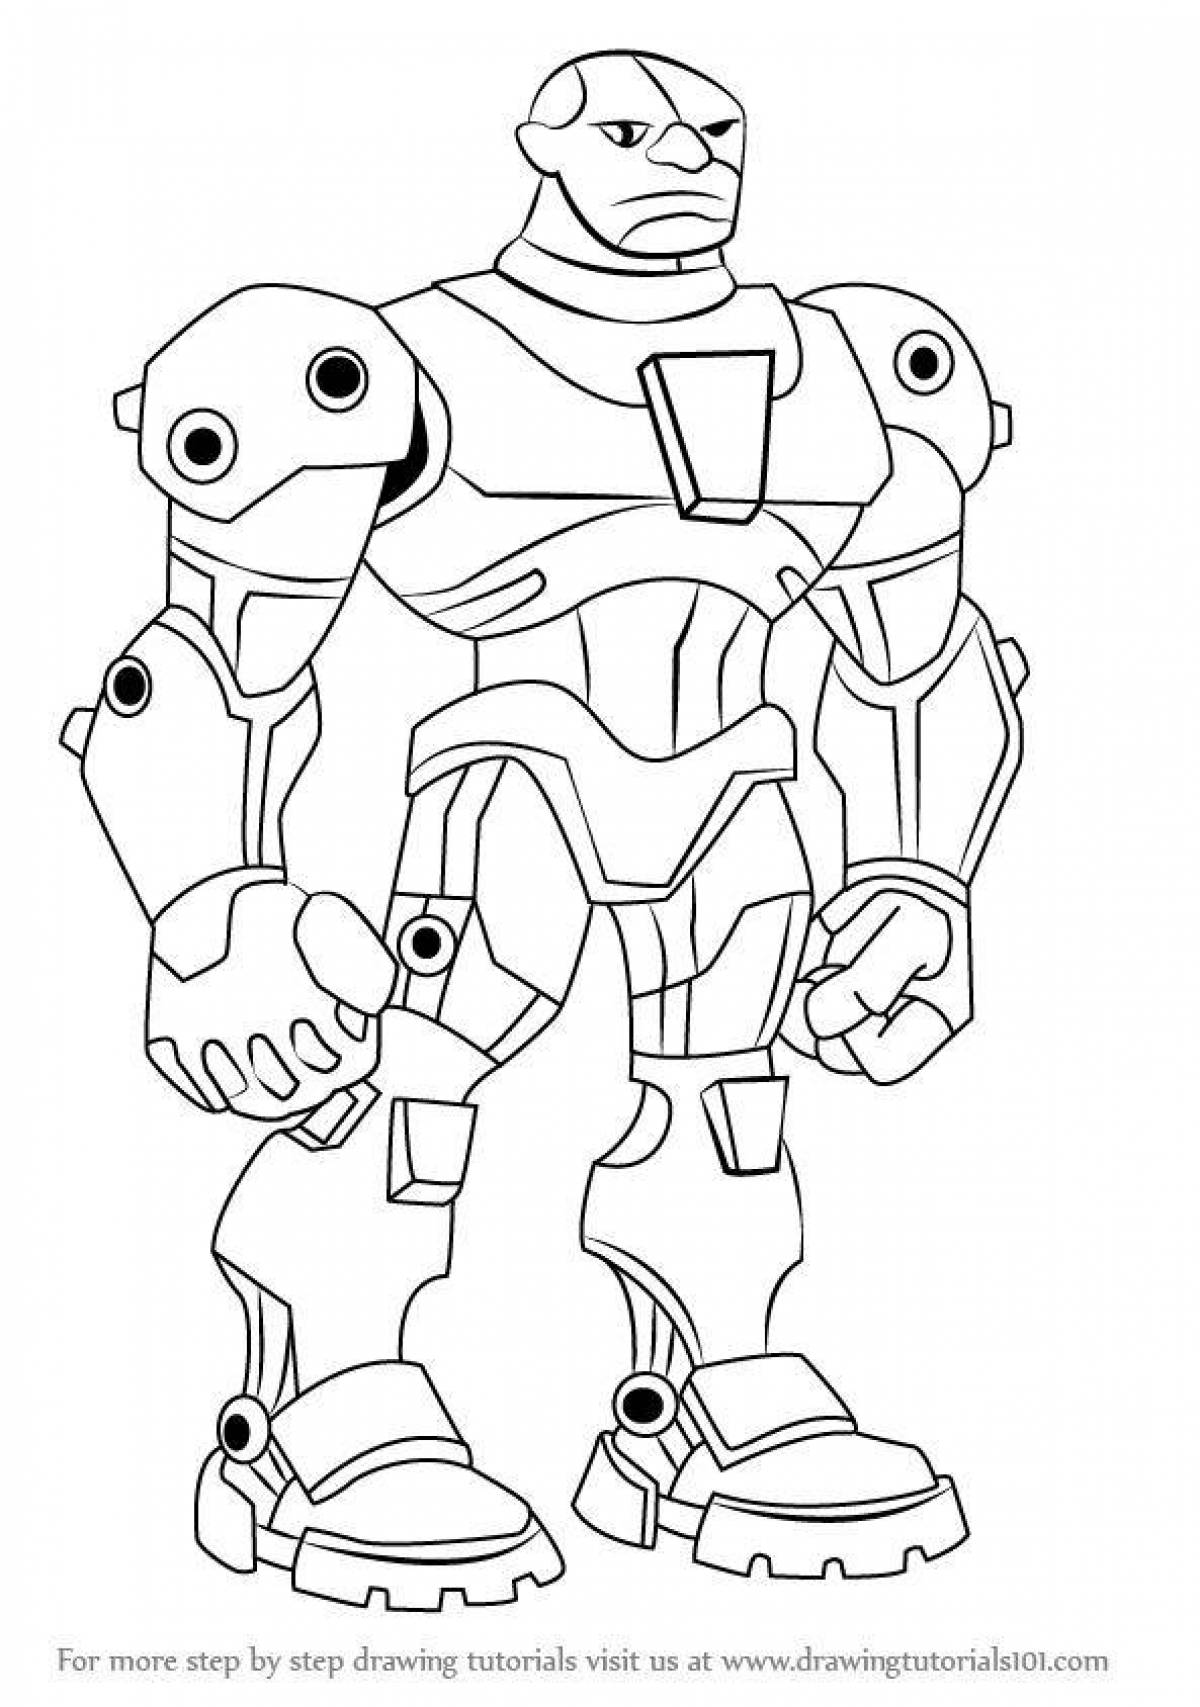 Gorgeous cyborg coloring page